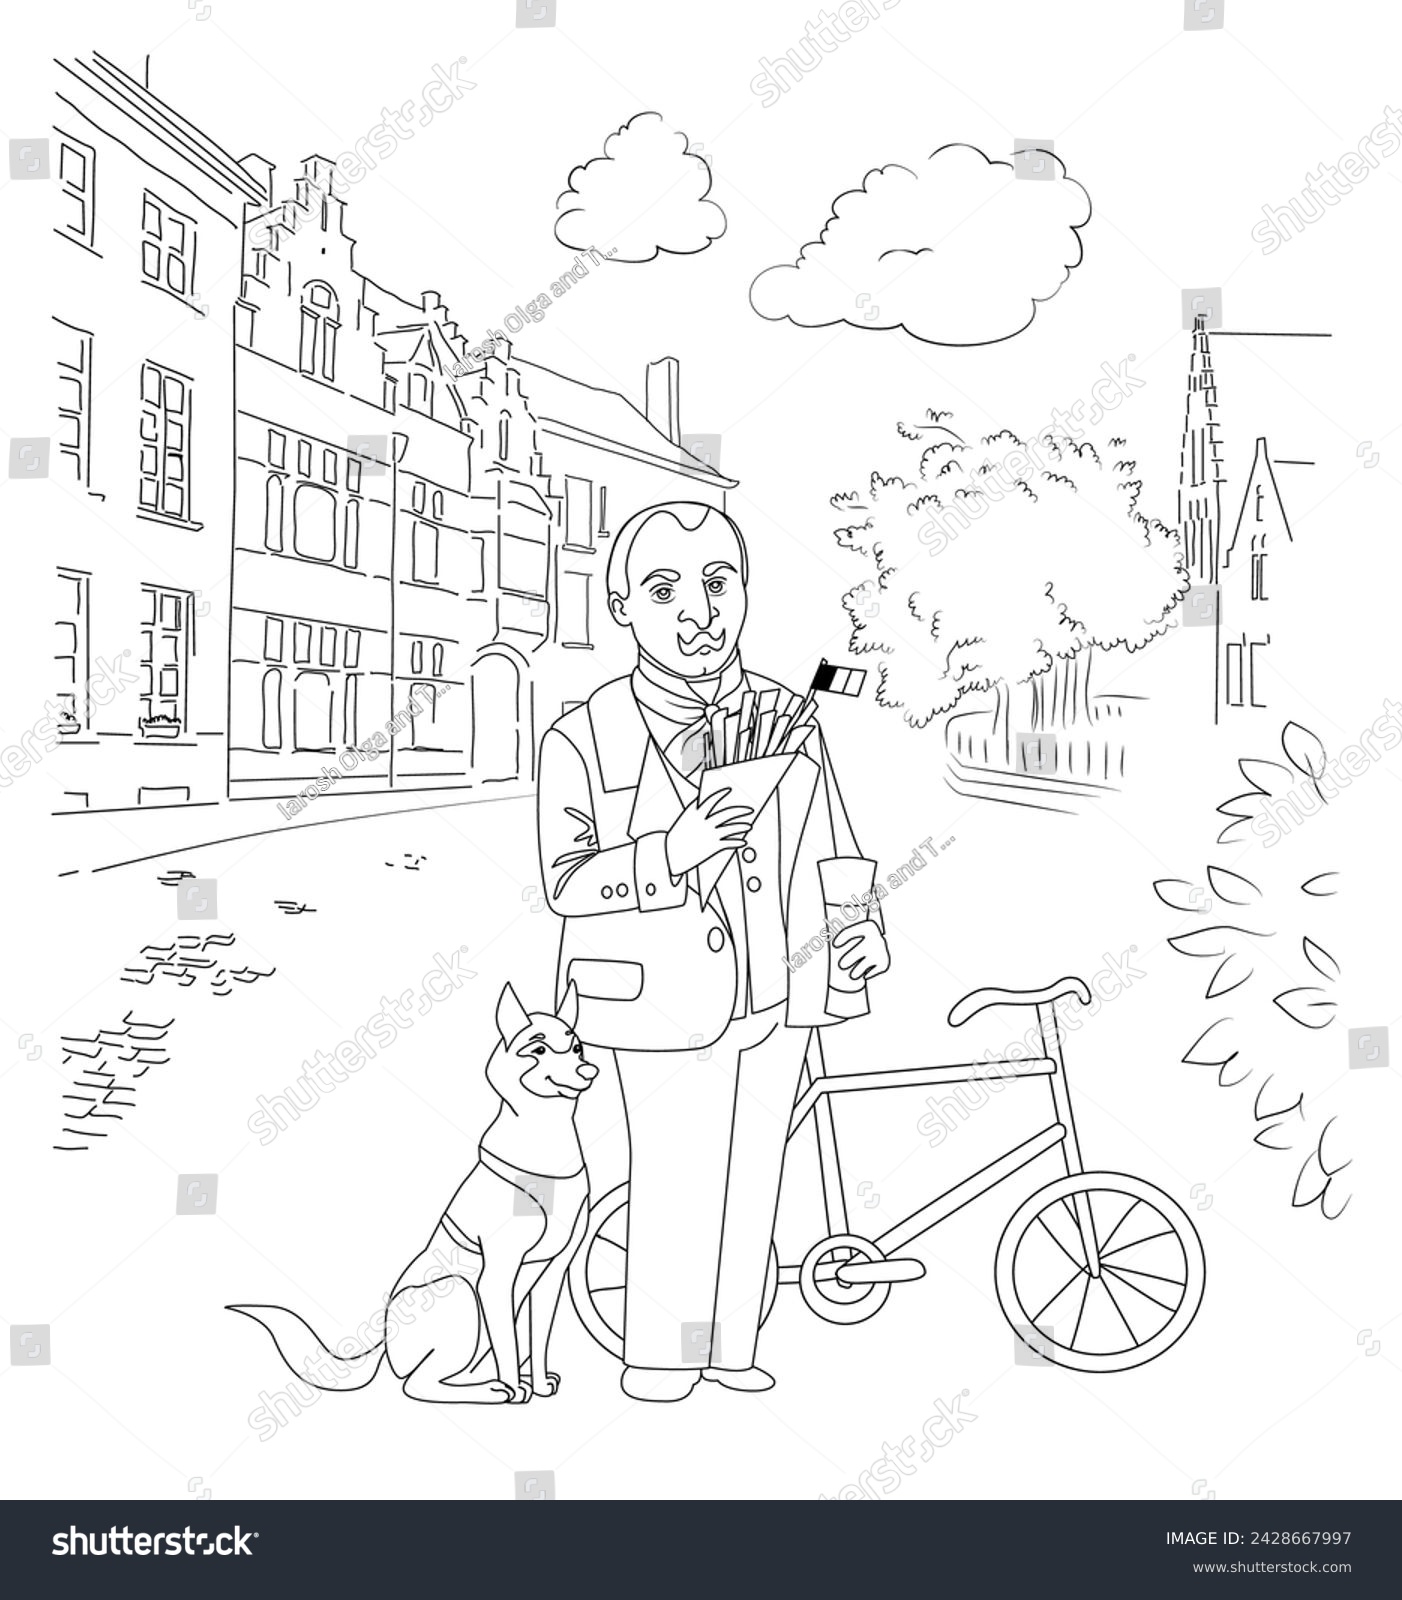 SVG of A man with a glass of Belgian beer and Belgian French fries in his hands, a Belgian bicycle, and a Belgian shepherd dog in the cityscape. Black and white vector illustration, coloring book.  svg